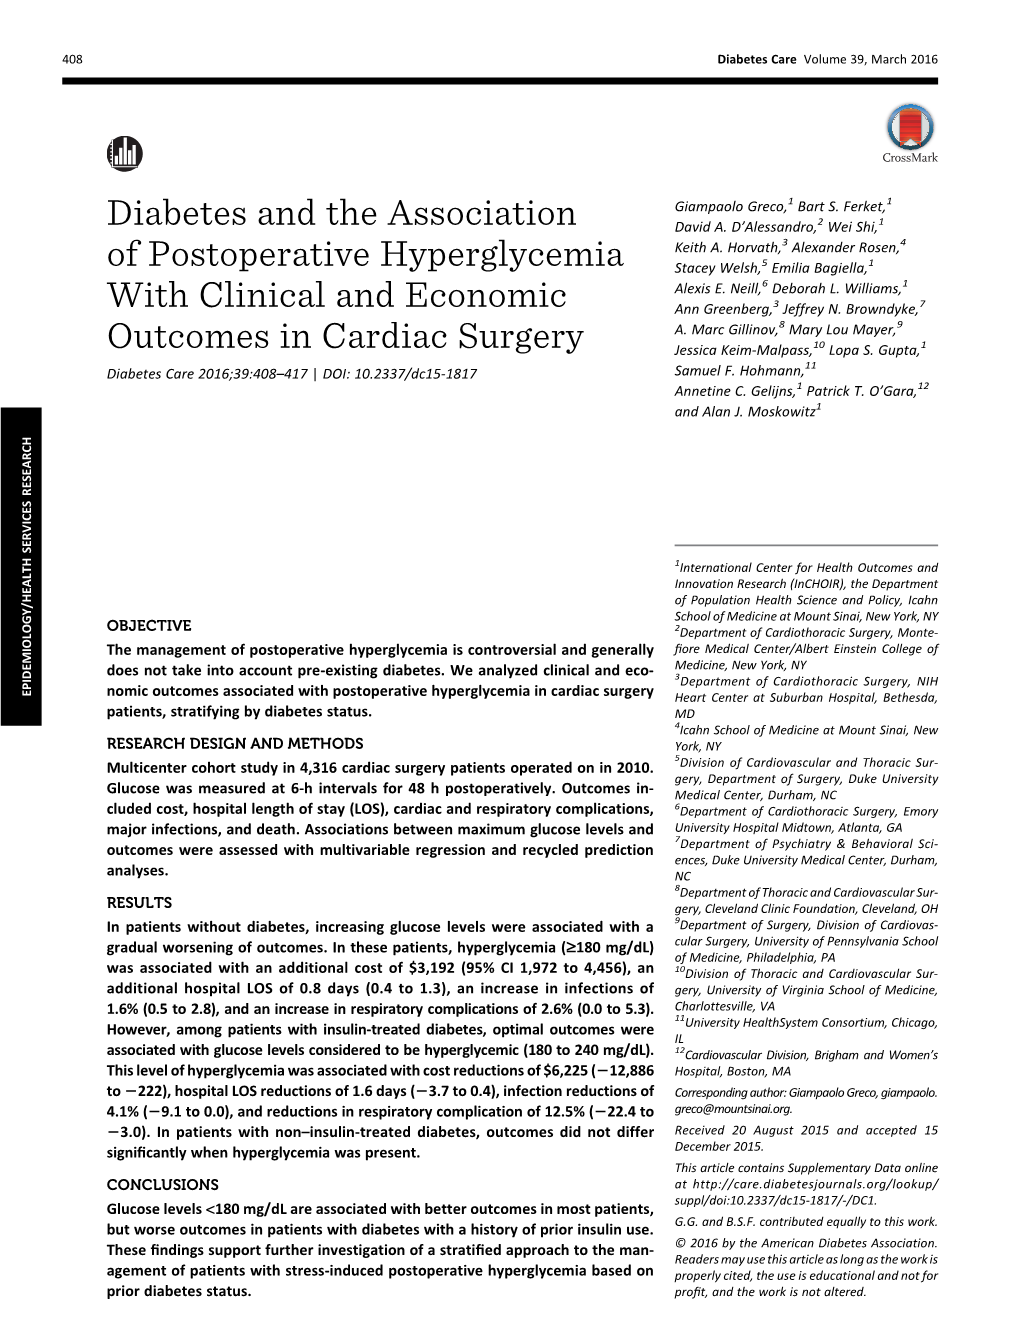 Diabetes and the Association of Postoperative Hyperglycemia With